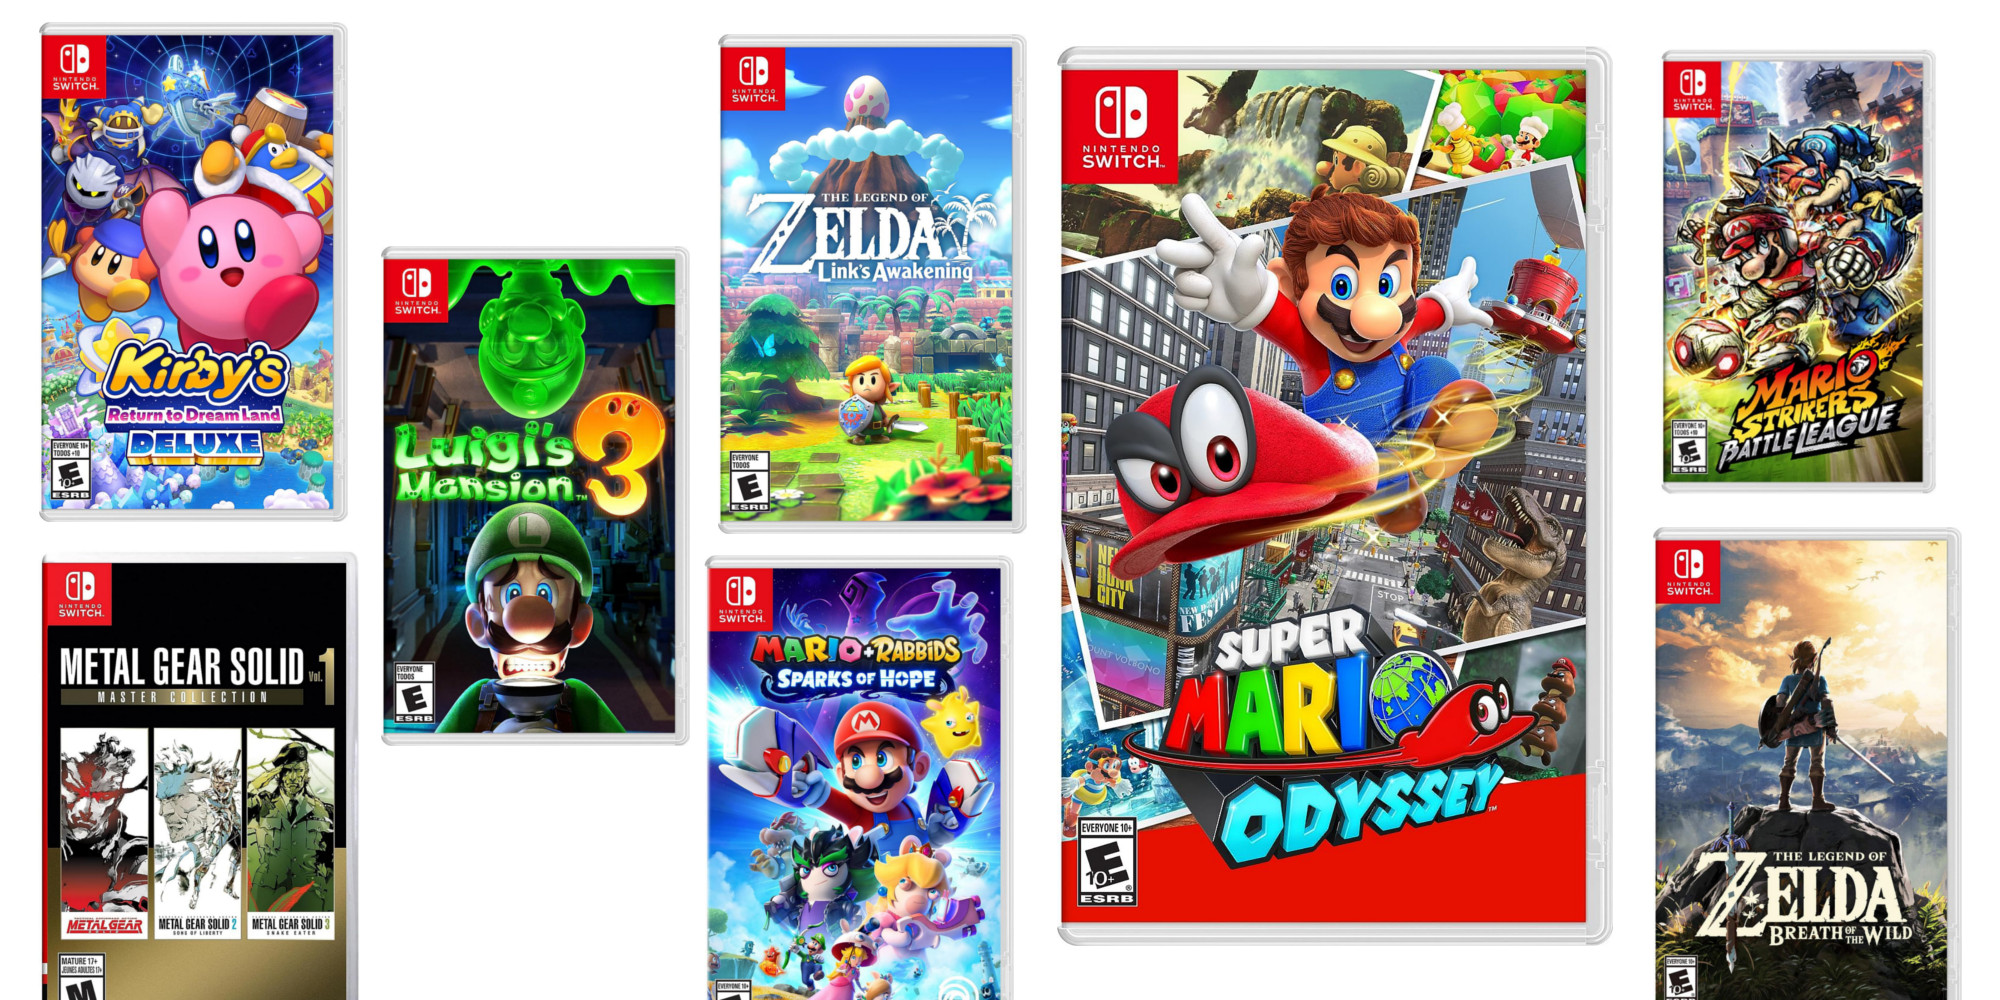 Official Nintendo Switch Black Friday game deals go live today at up to